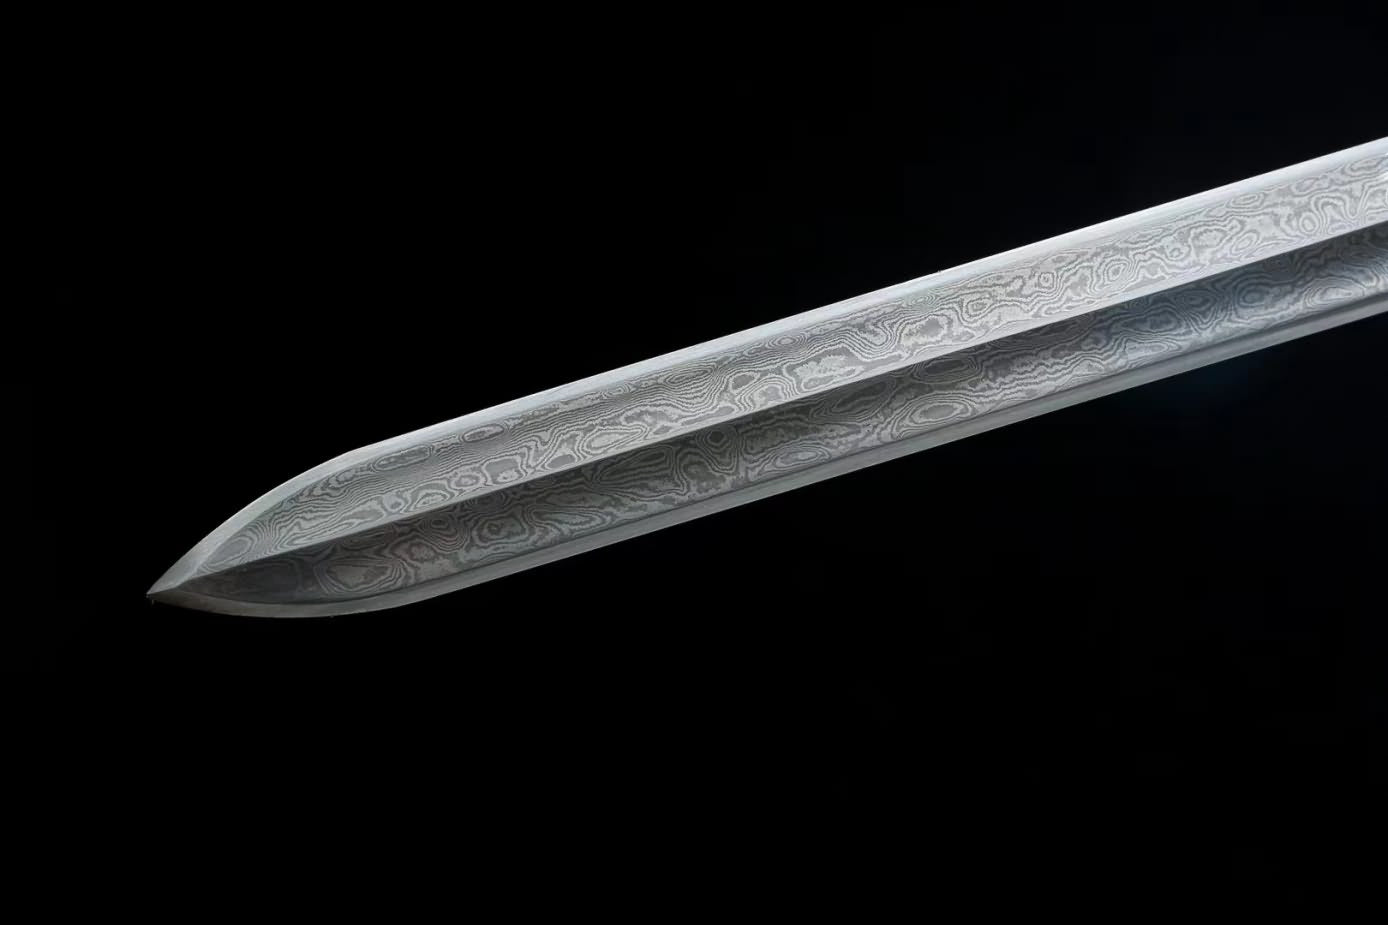 Tang jian Swords Real Damascus Steel Blade,Alloy Fittings,Silver Appearance,LOONGSWORD